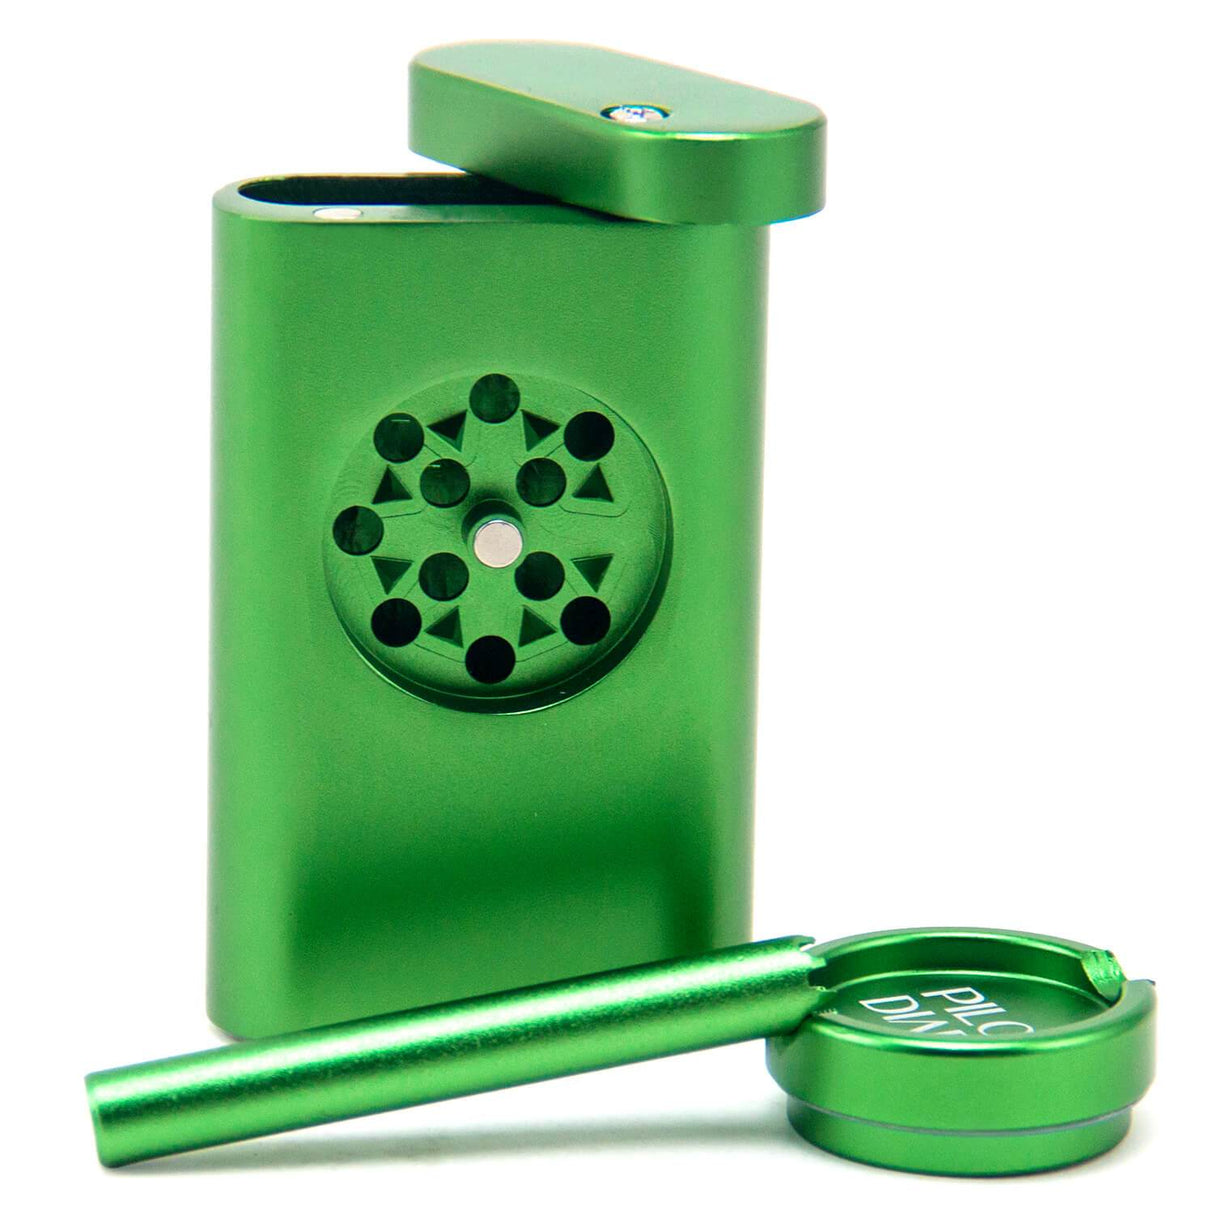 PILOT DIARY Dugout with Mini Grinder in Green, Front View on Seamless White Background